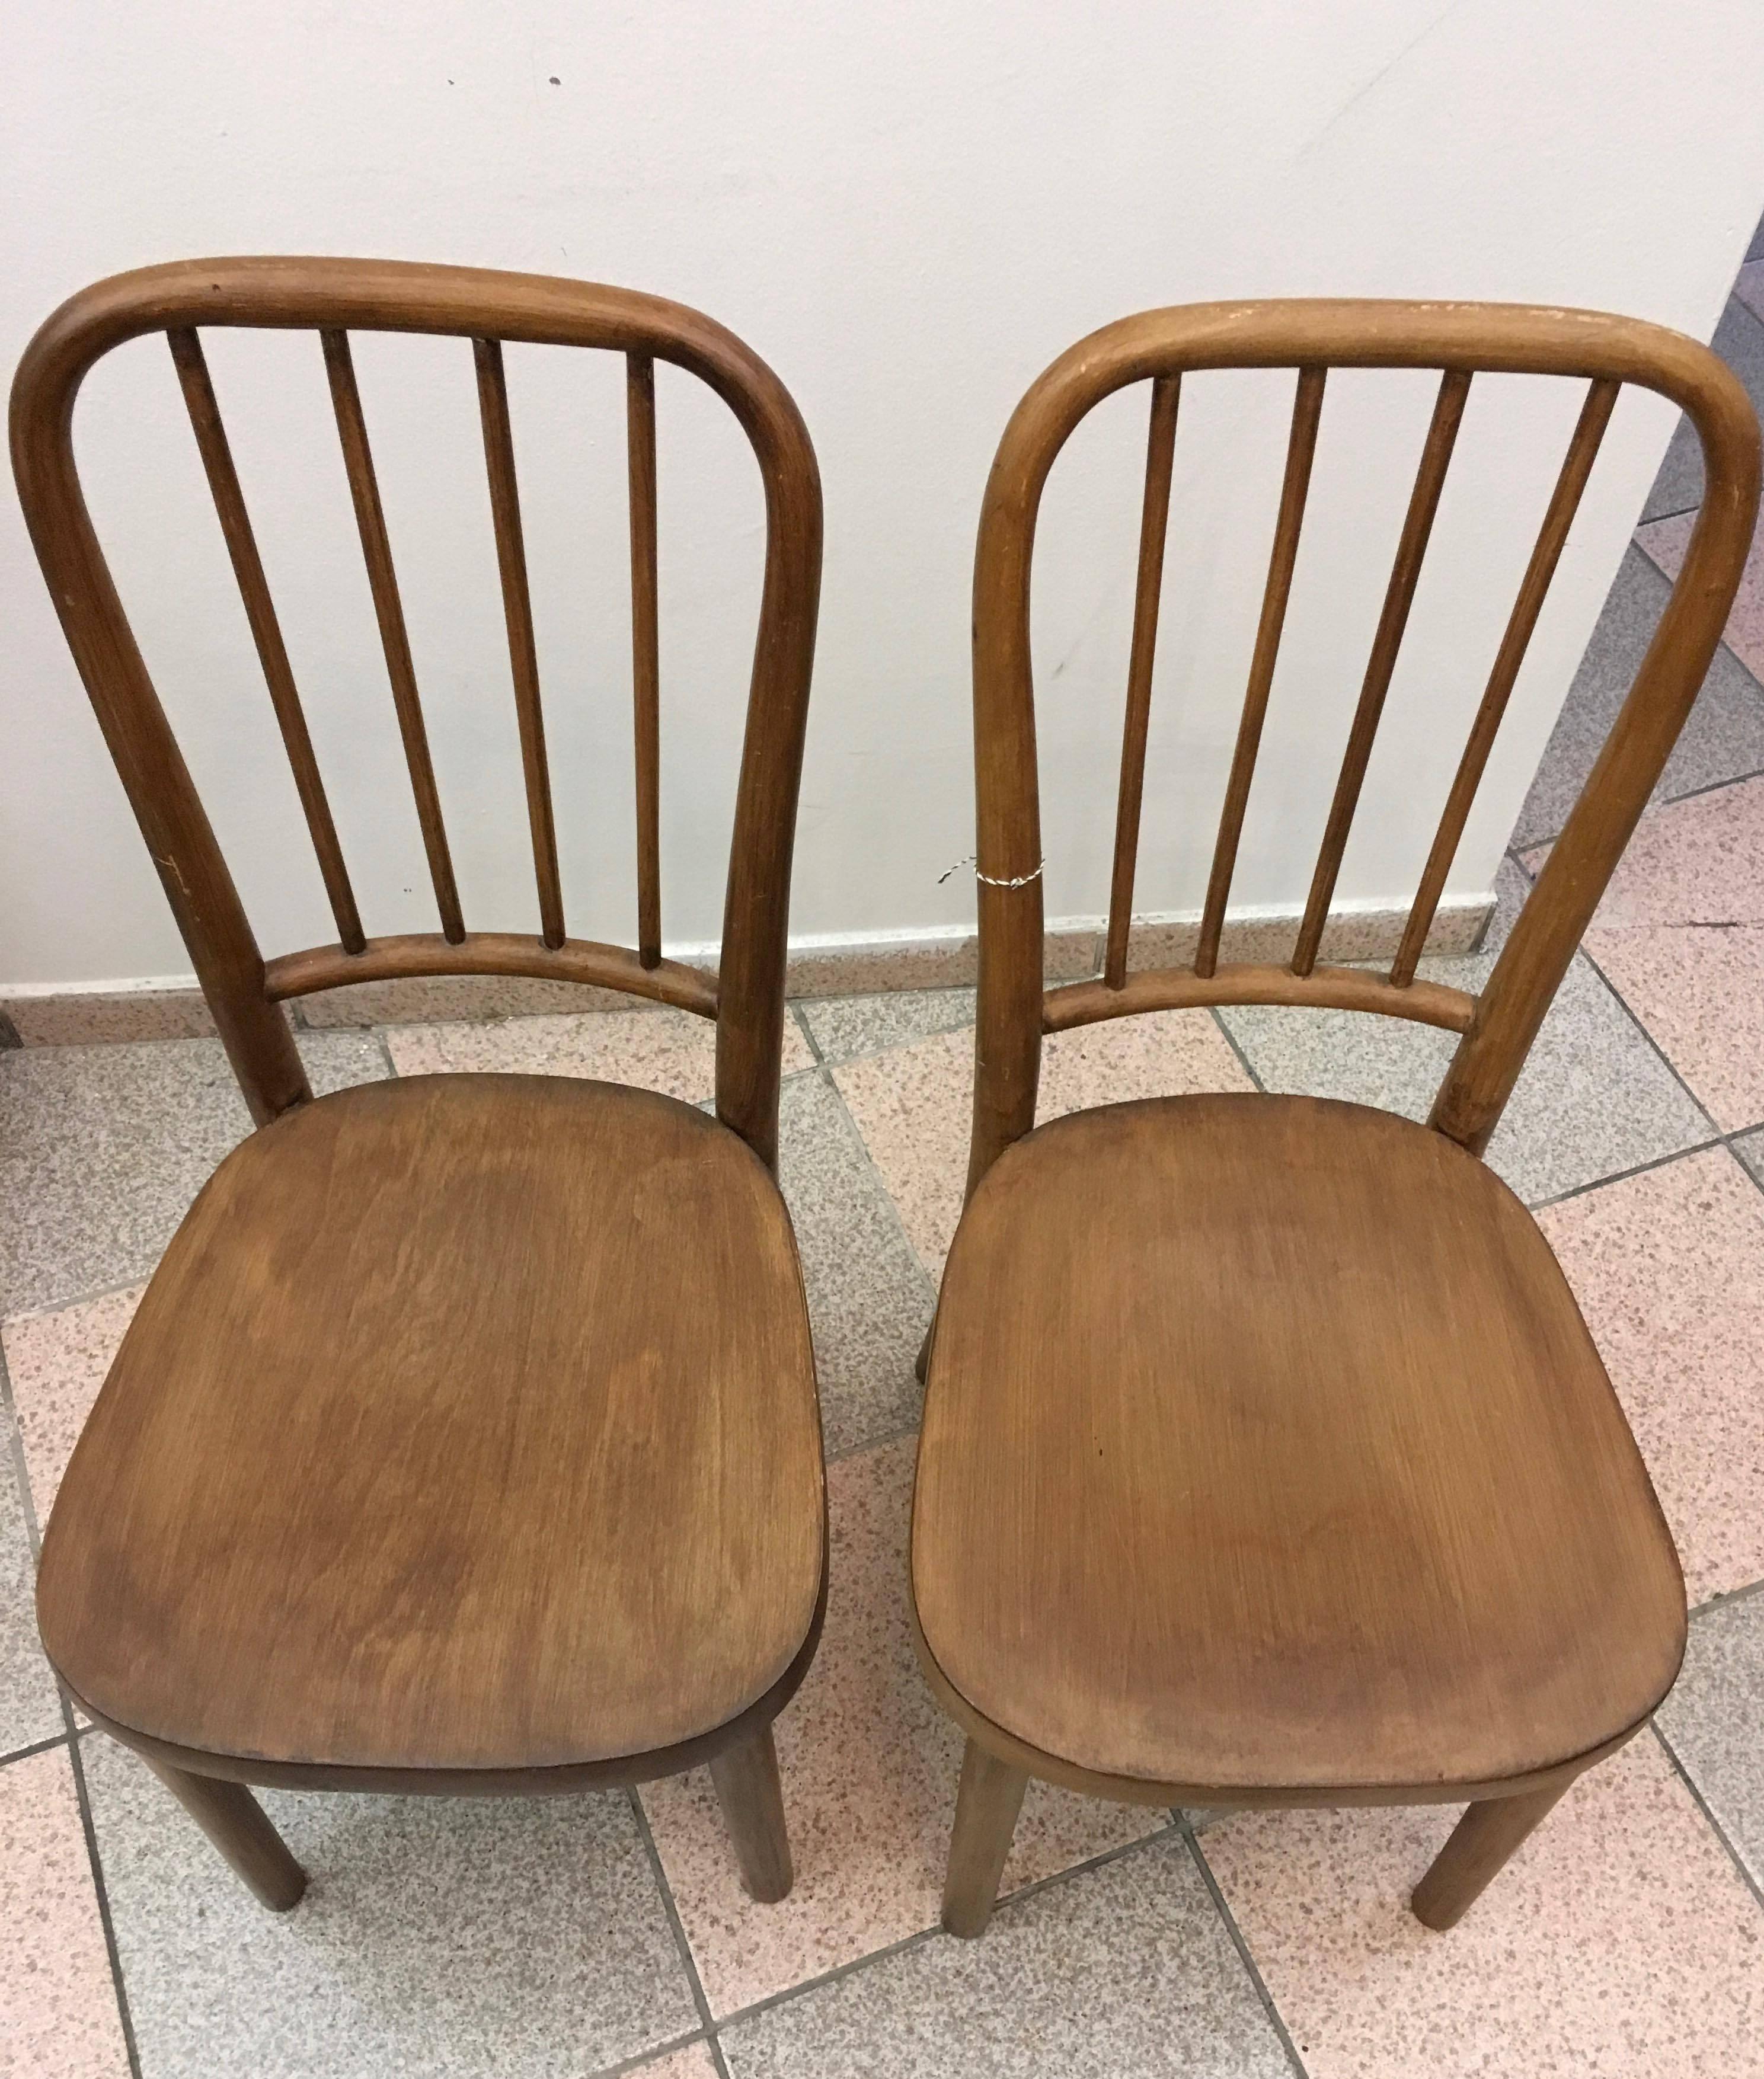 Bauhaus Pair of Chairs by Josef Frank for Thonet, Model A 63